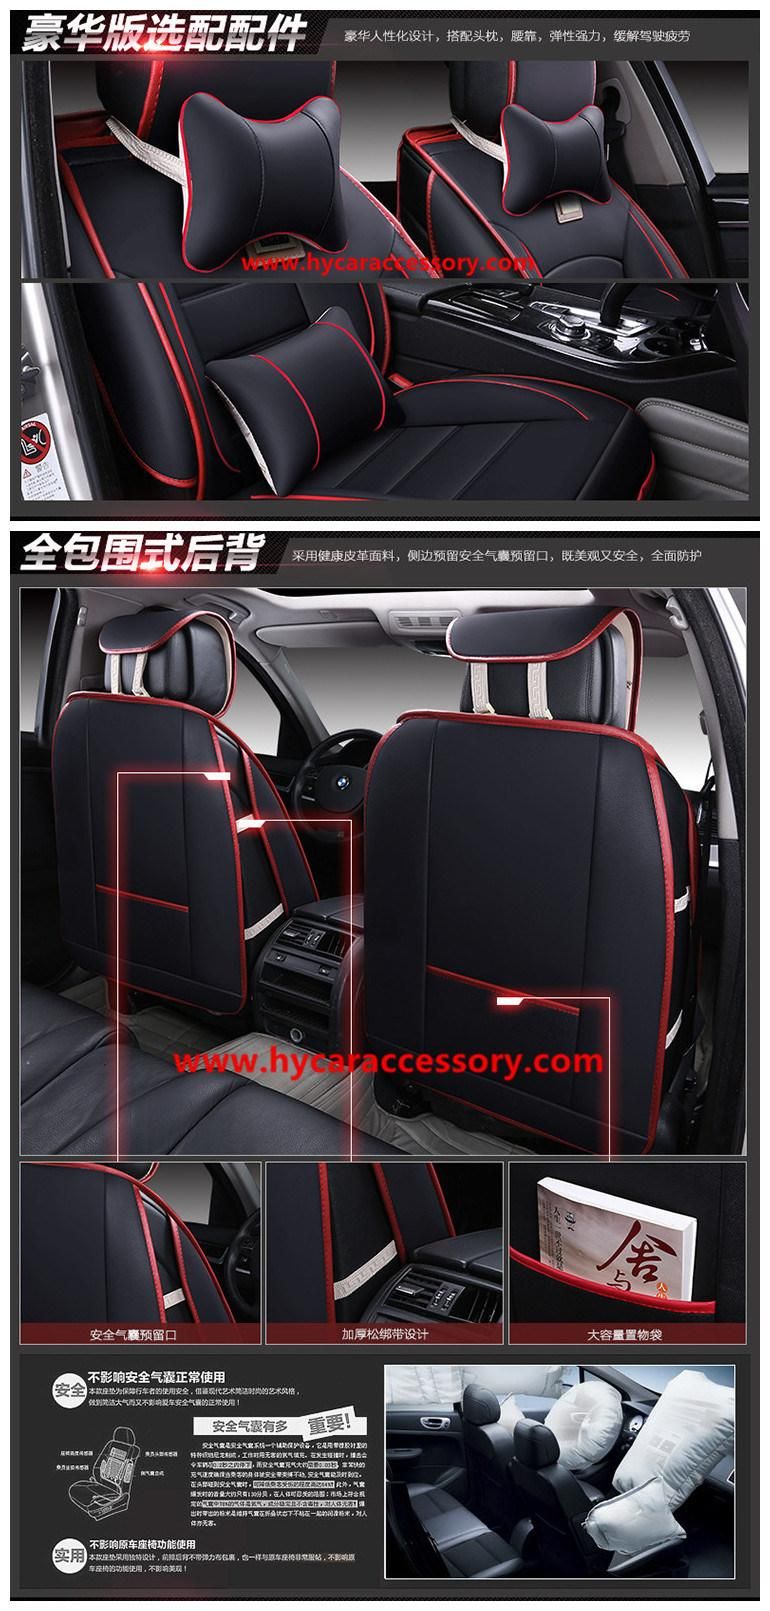 Factory Supply PVC/PU Leather Universal Beige Car Seat Cushion for All 5 Seater Car Models